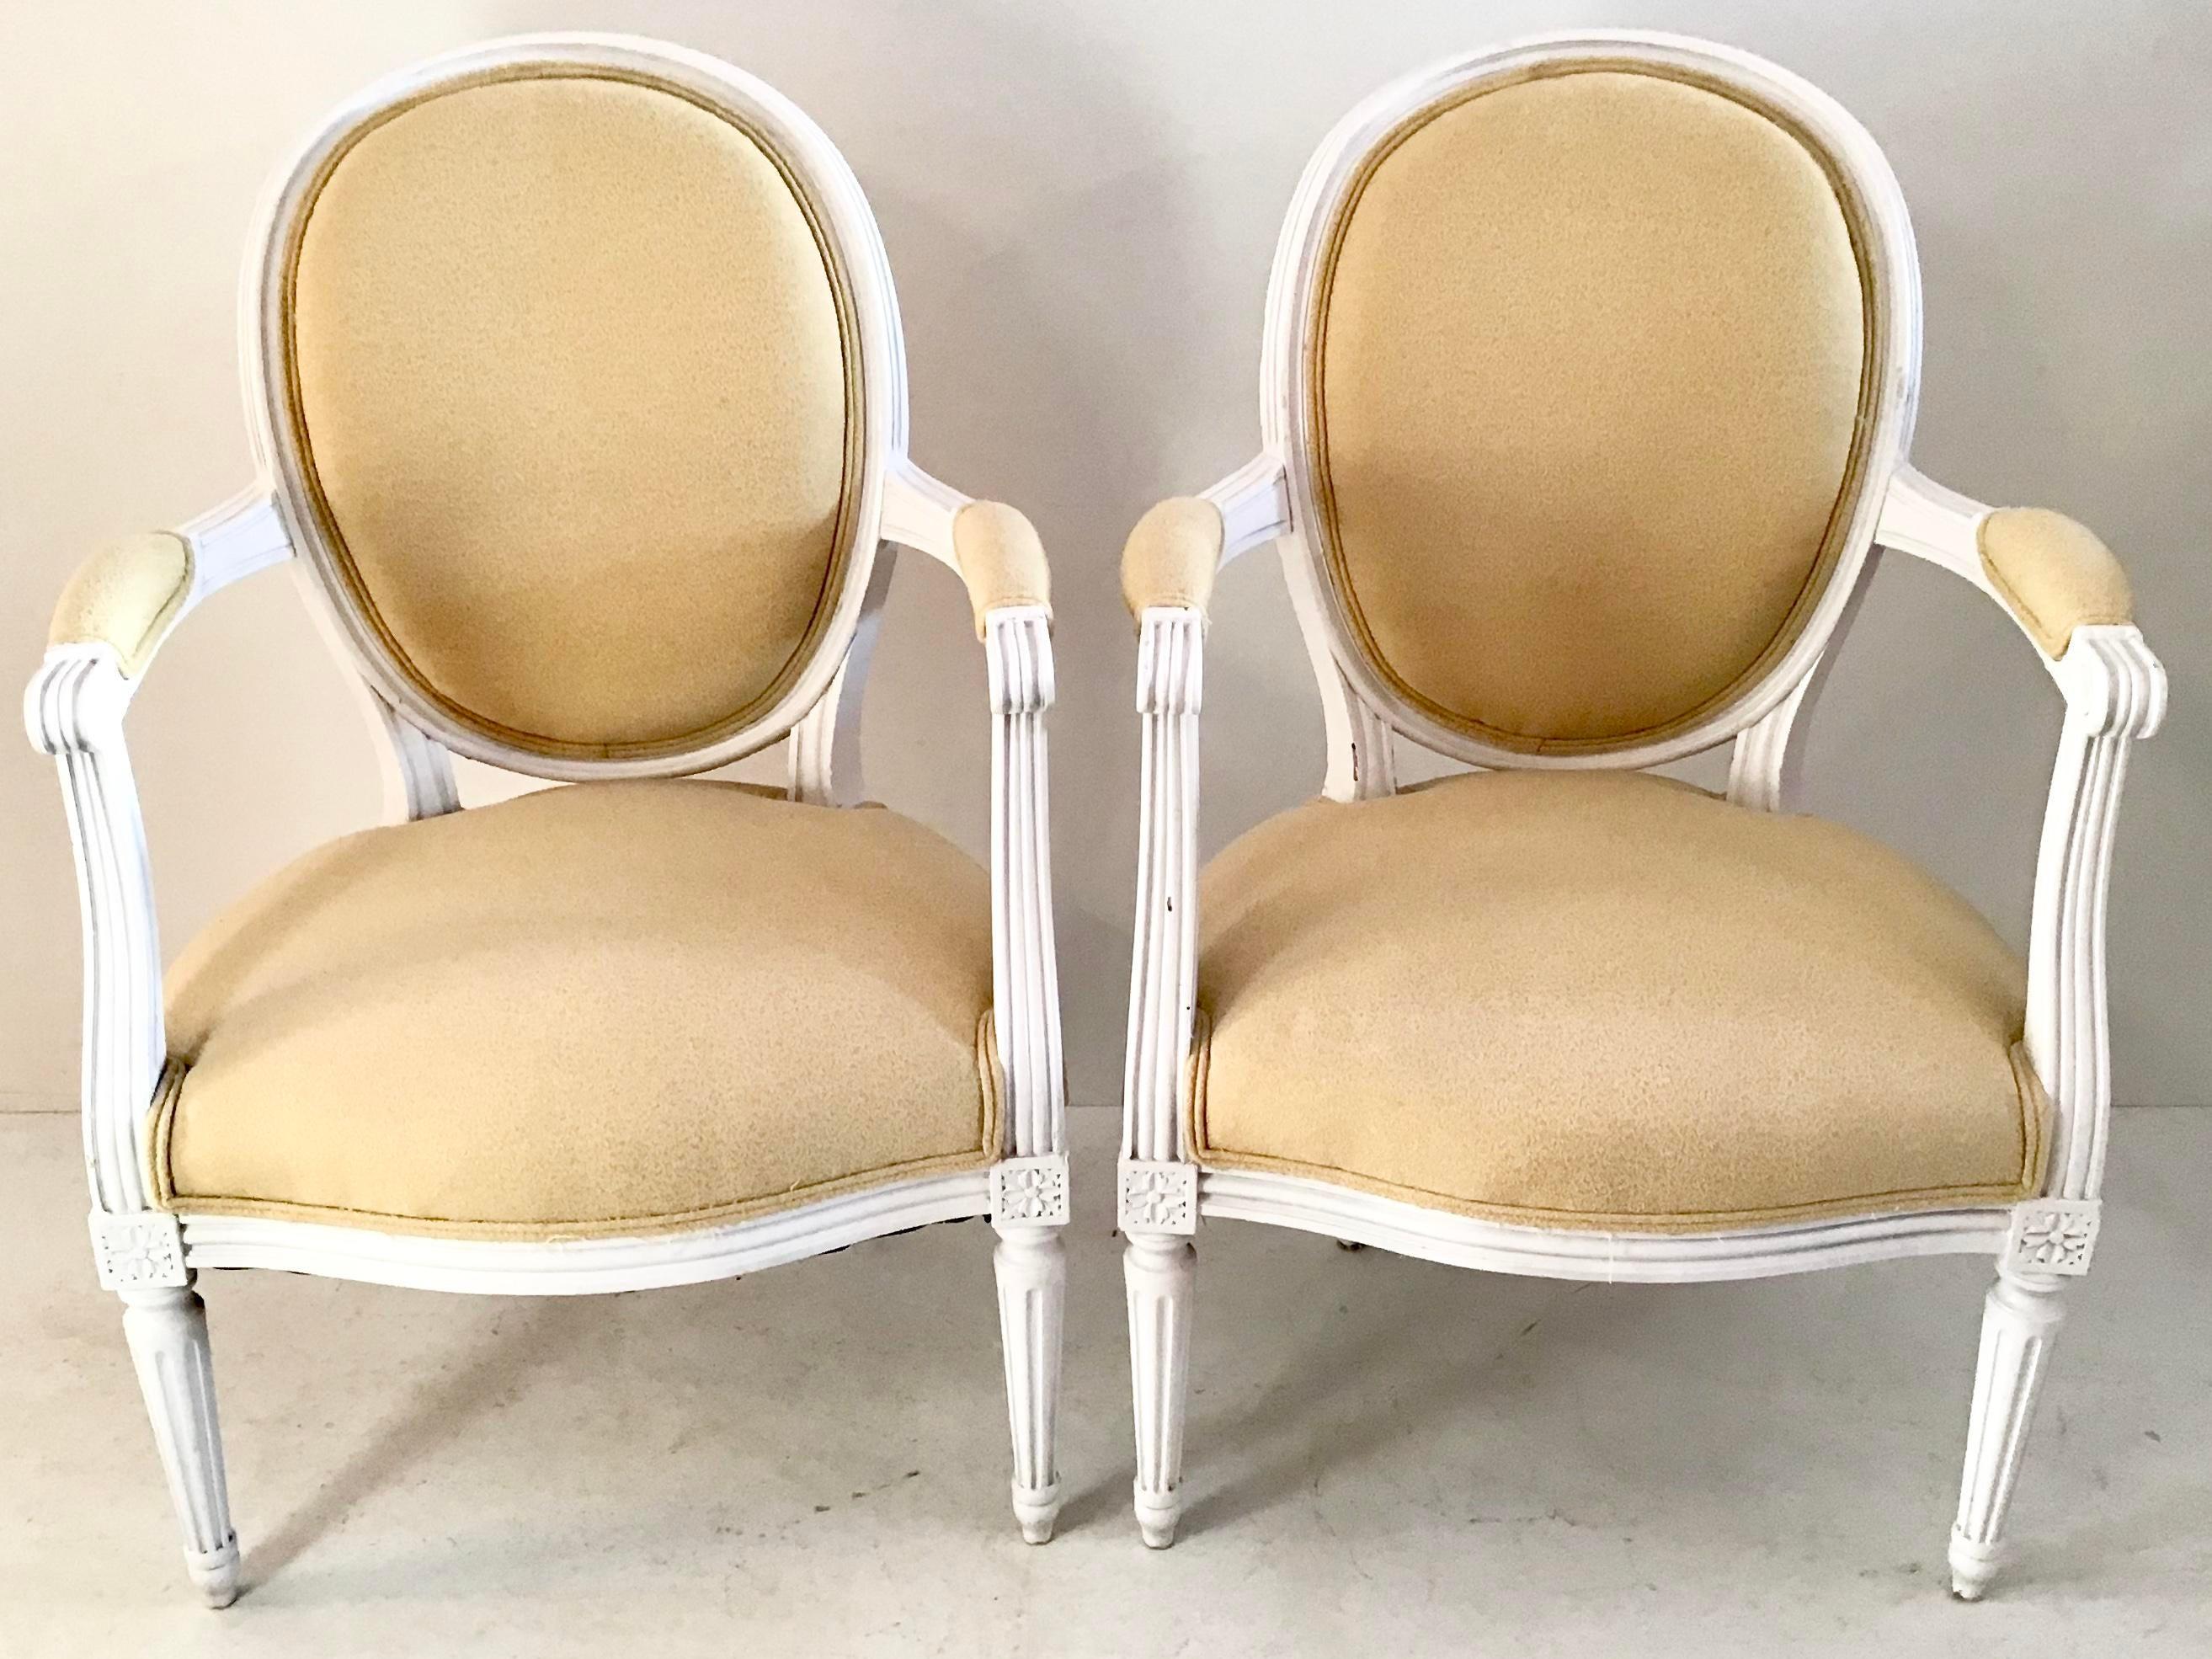 Pair of 18th century Louis XVI fauteuils with painted white frames and yellow upholstery. Some wear, but very nice conditions.